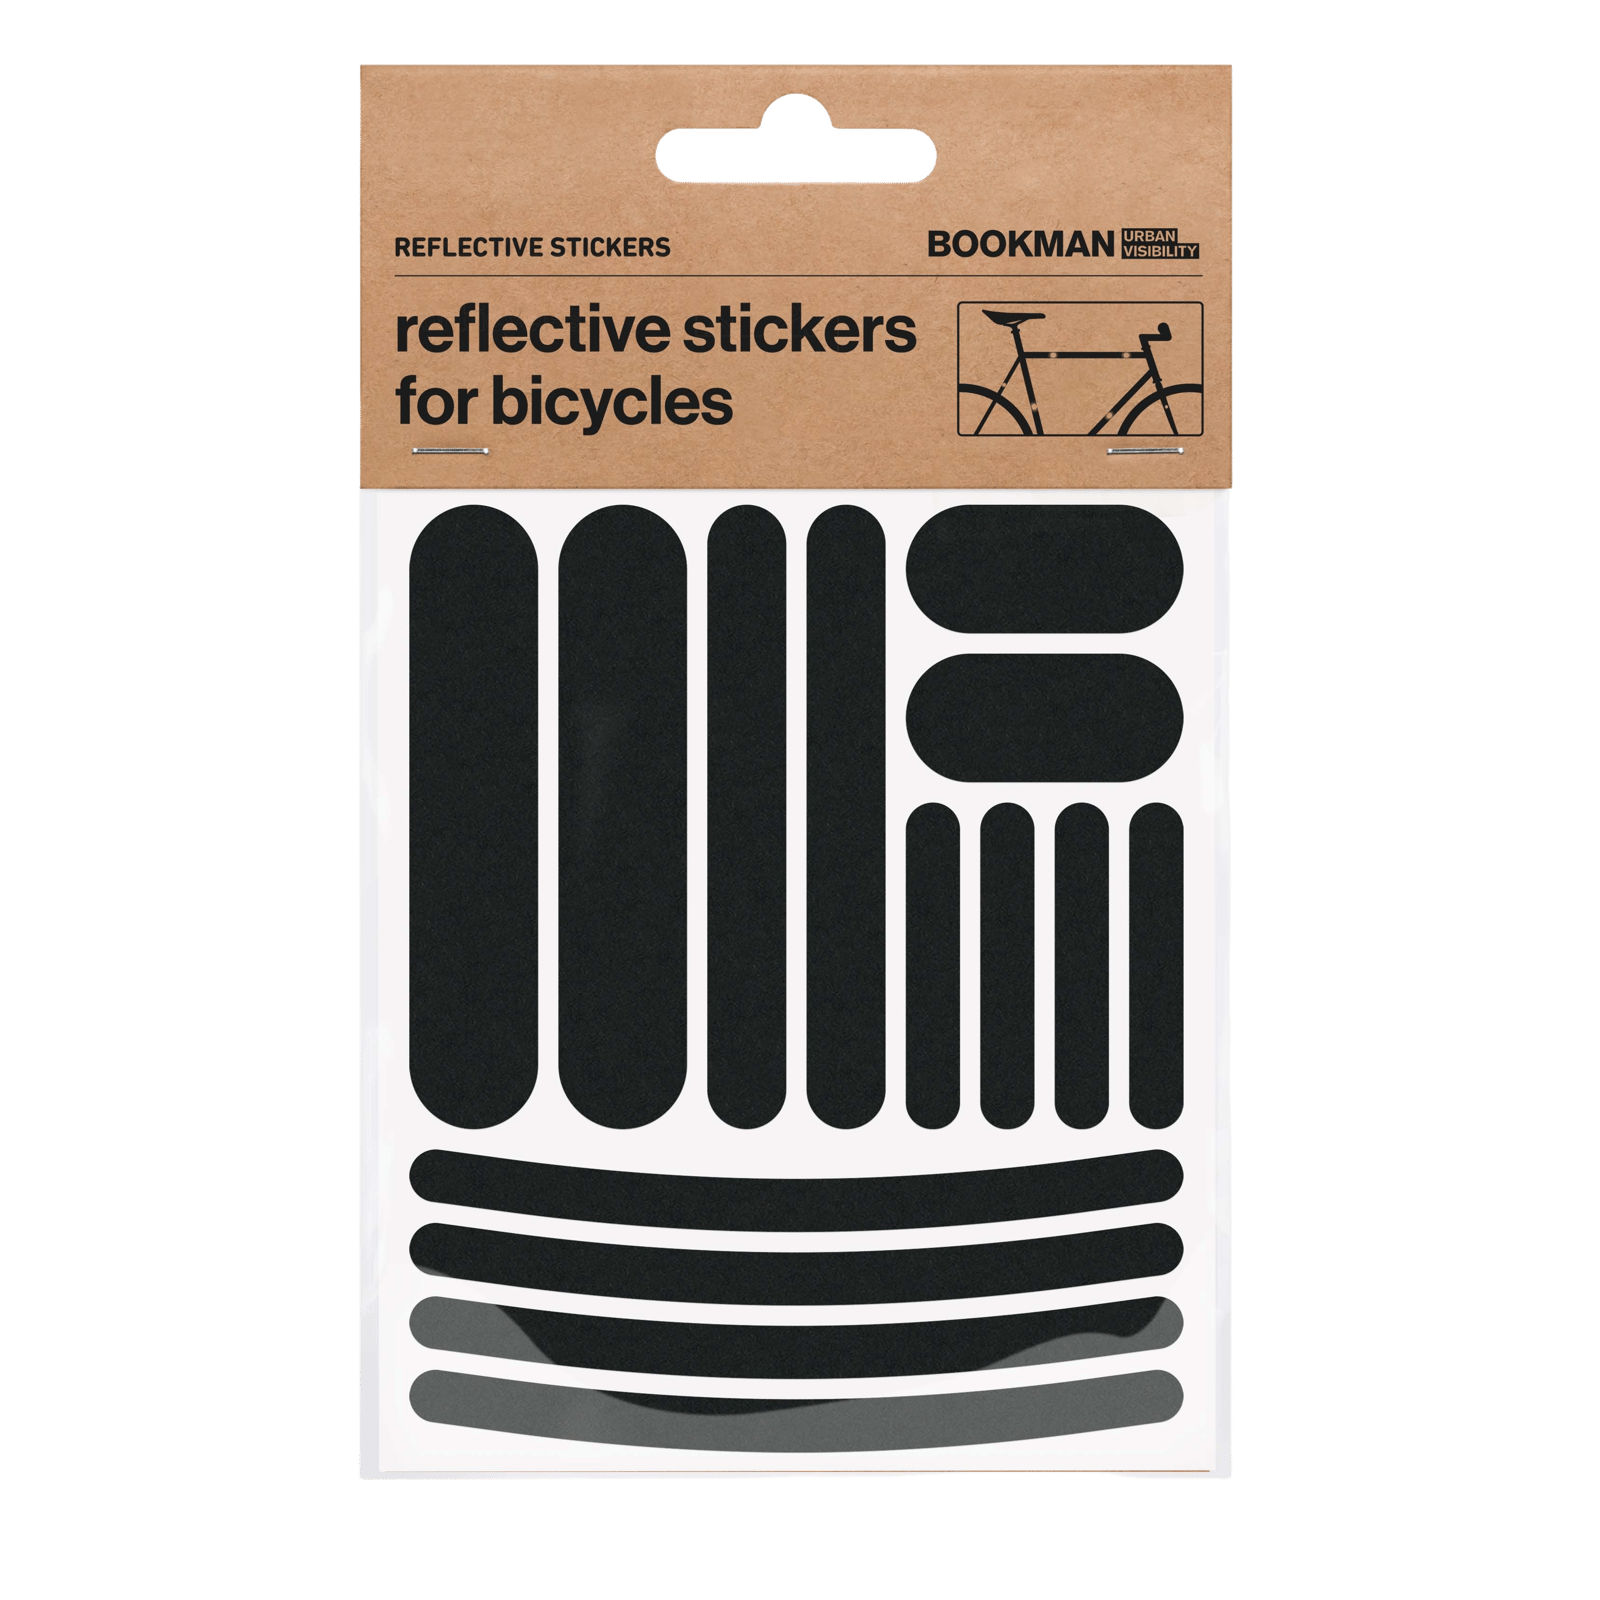 Bookman Urban Visibility Reflective Bicycle Stickers Strips Black 1 st